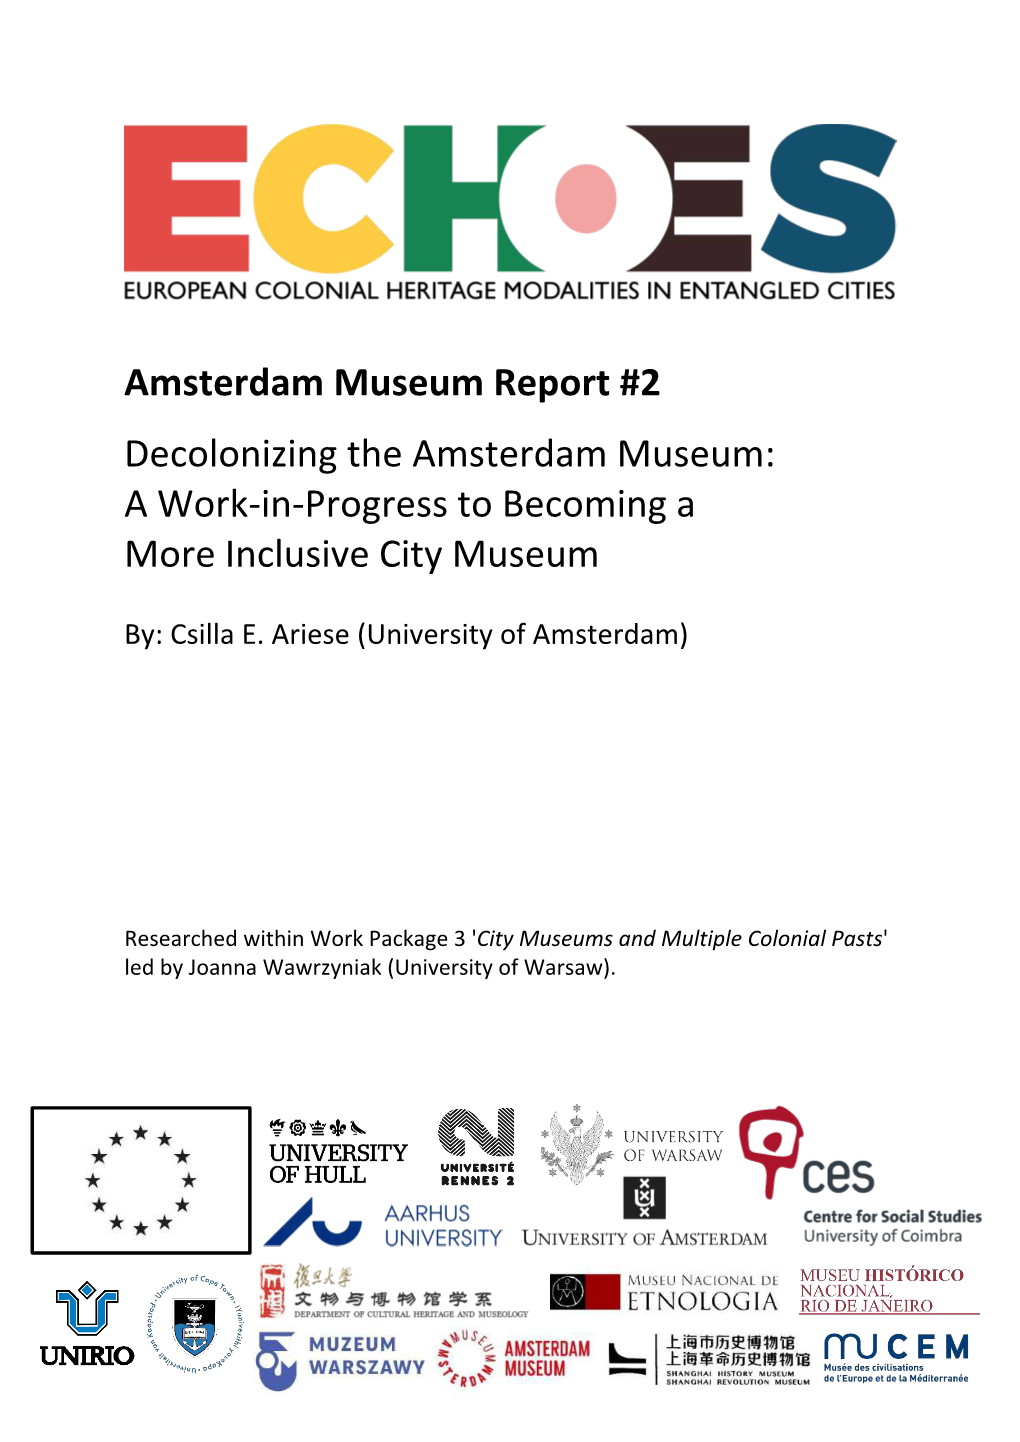 Decolonizing the Amsterdam Museum: a Work-In-Progress to Becoming a More Inclusive City Museum